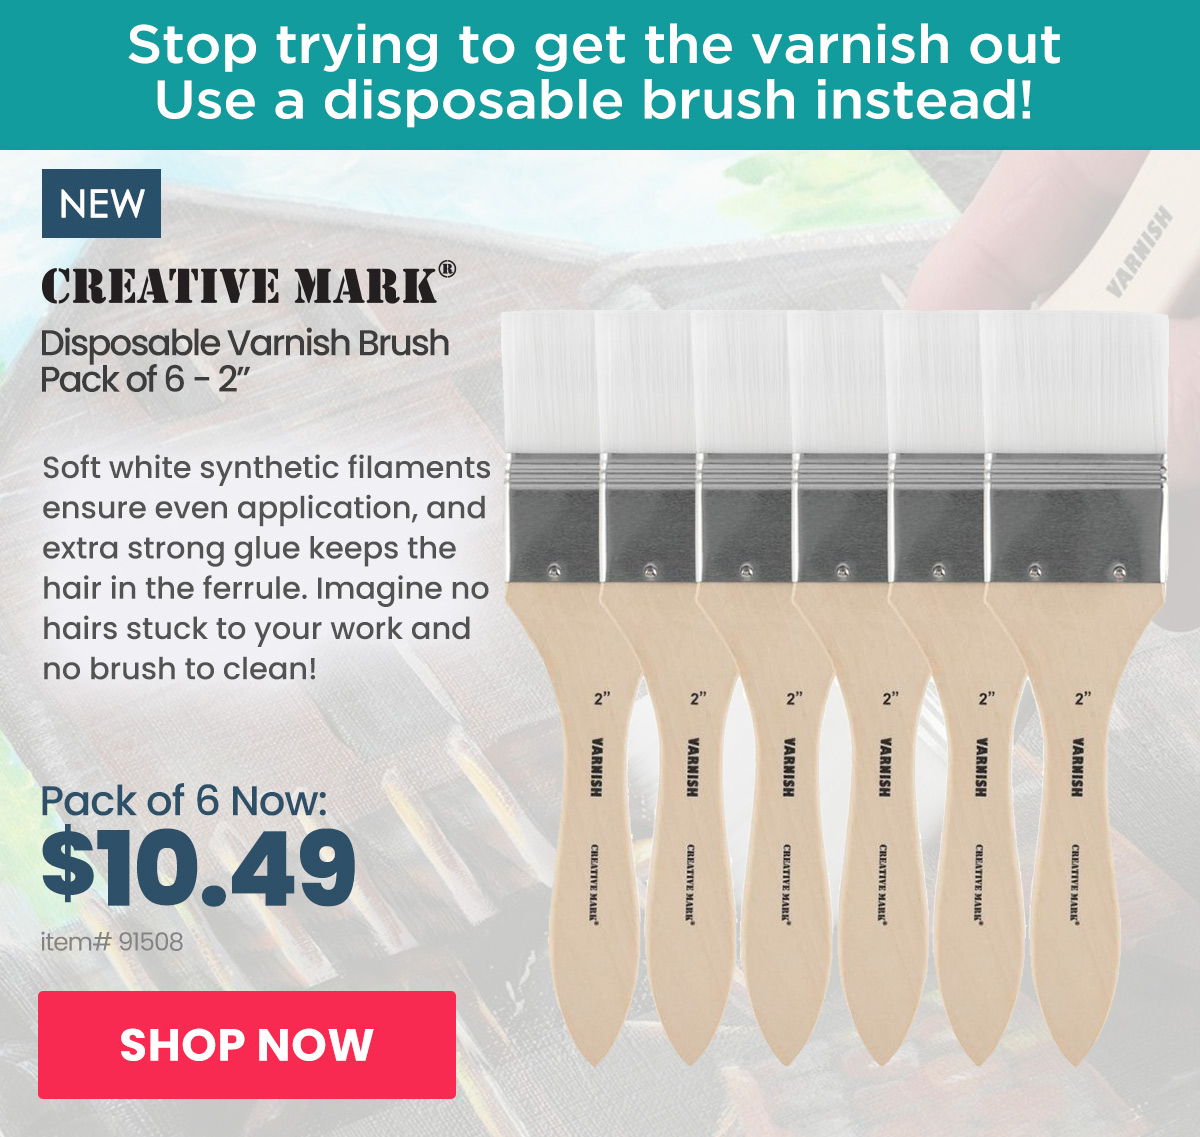 Creative Mark Disposable Varnish Brushes - Set of 6, 2 inch